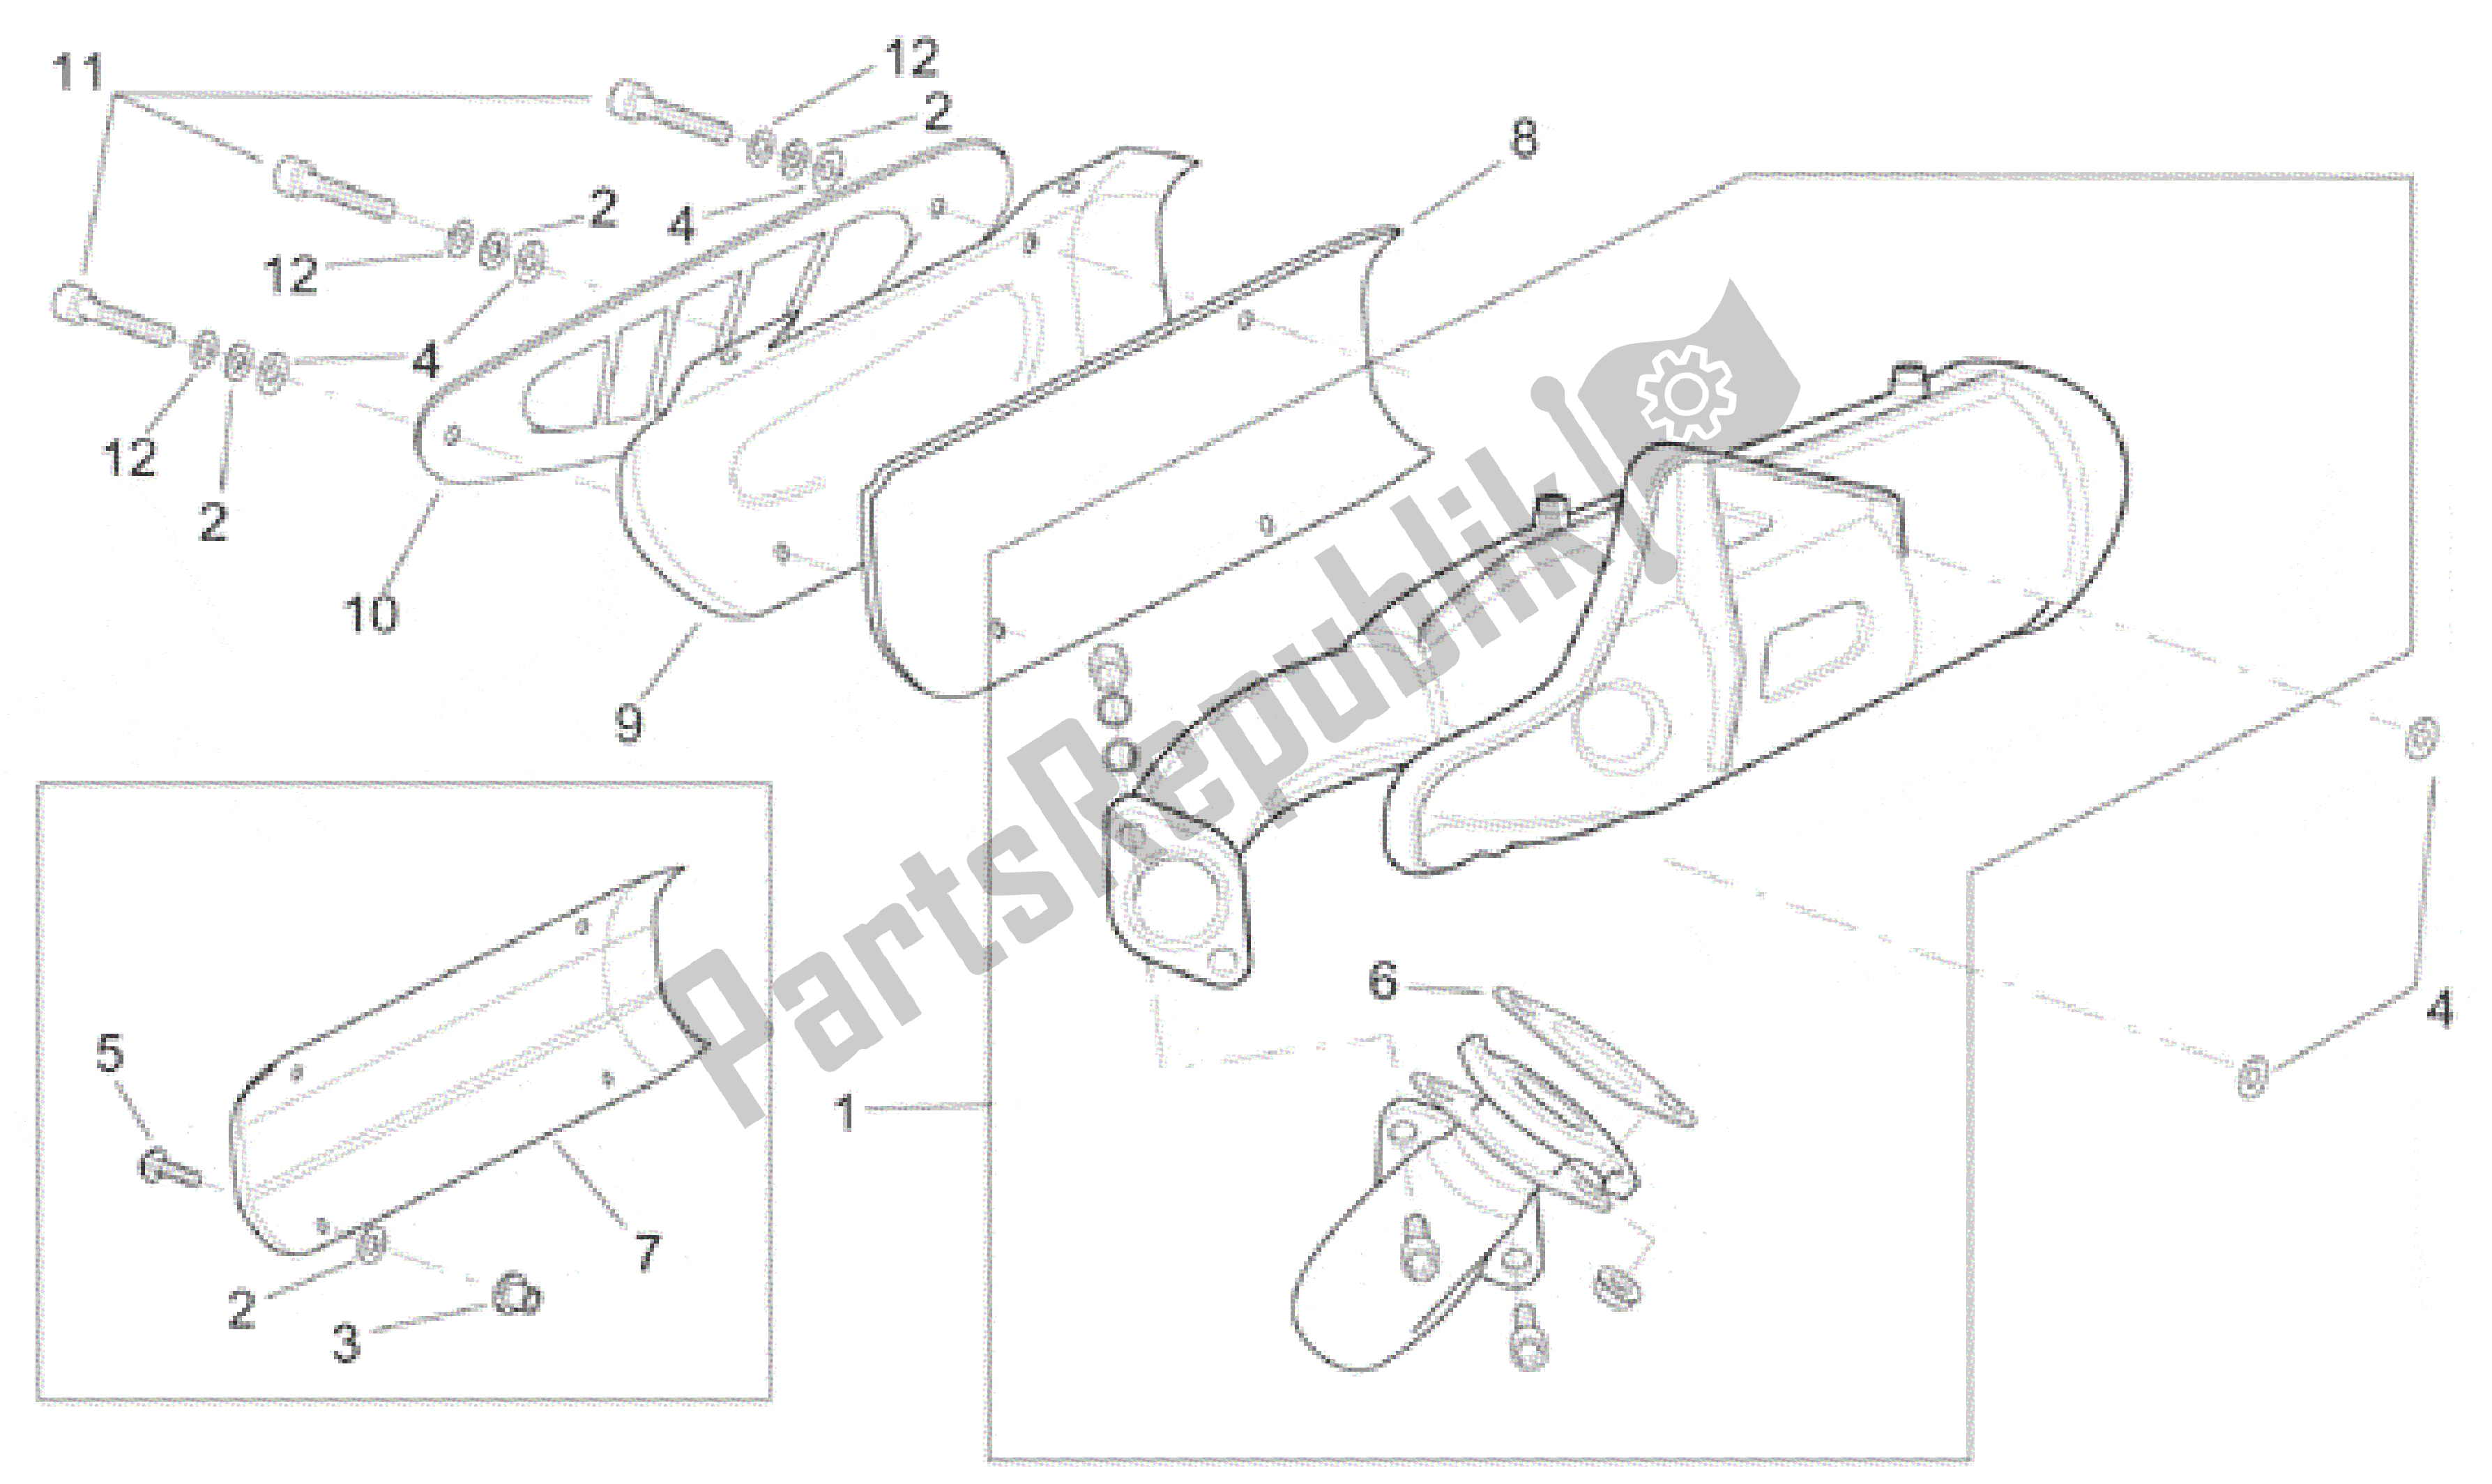 All parts for the Exhaust Unit of the Aprilia SR 150 1999 - 2001